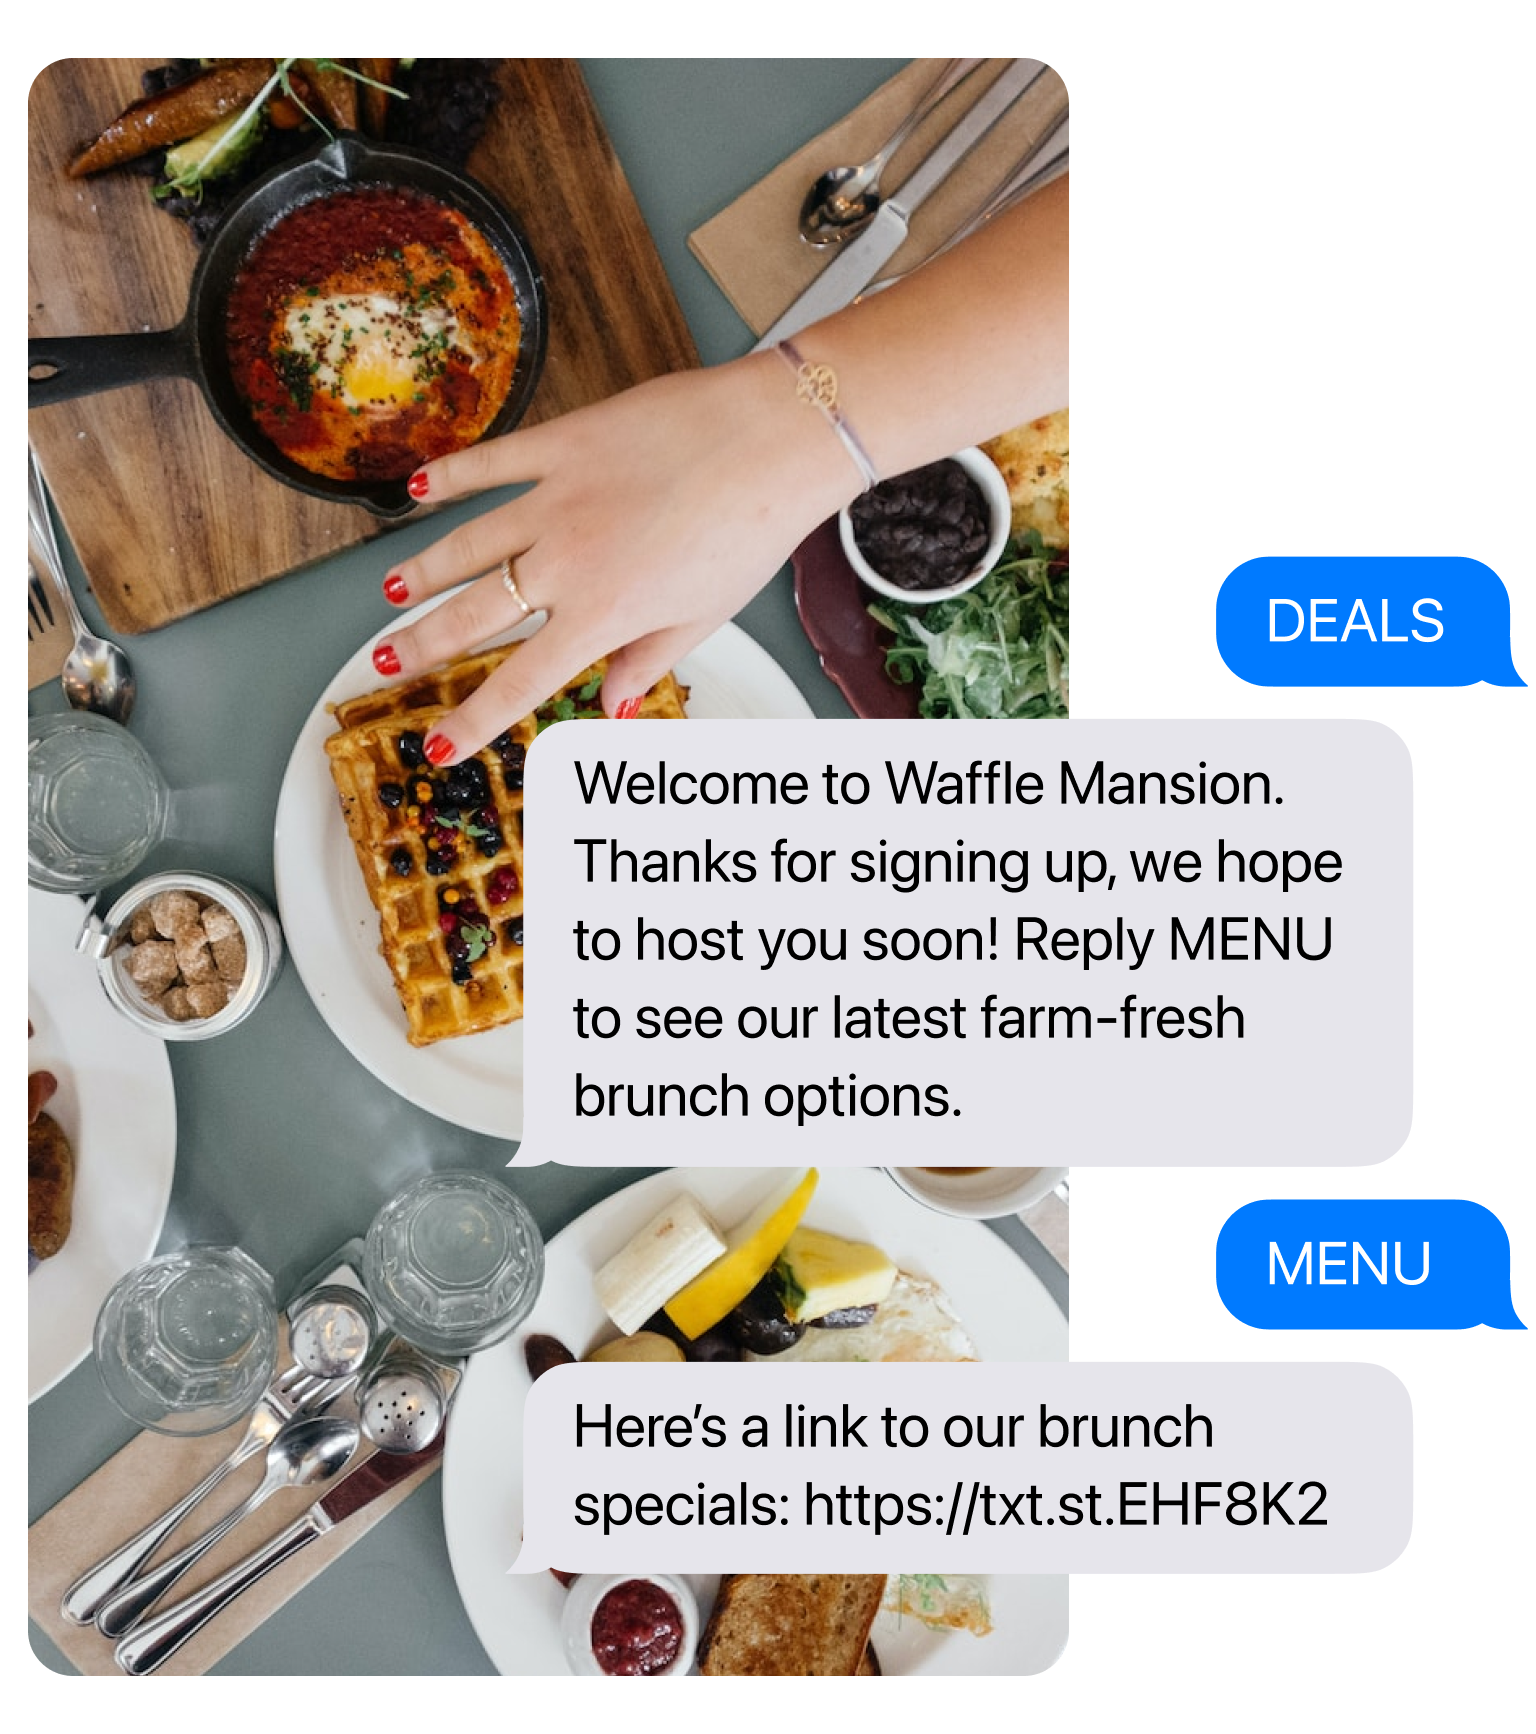 A woman prepares a breakfast meal with text message bubbles as a conversation surrounding her hands. The first text is received and reads 